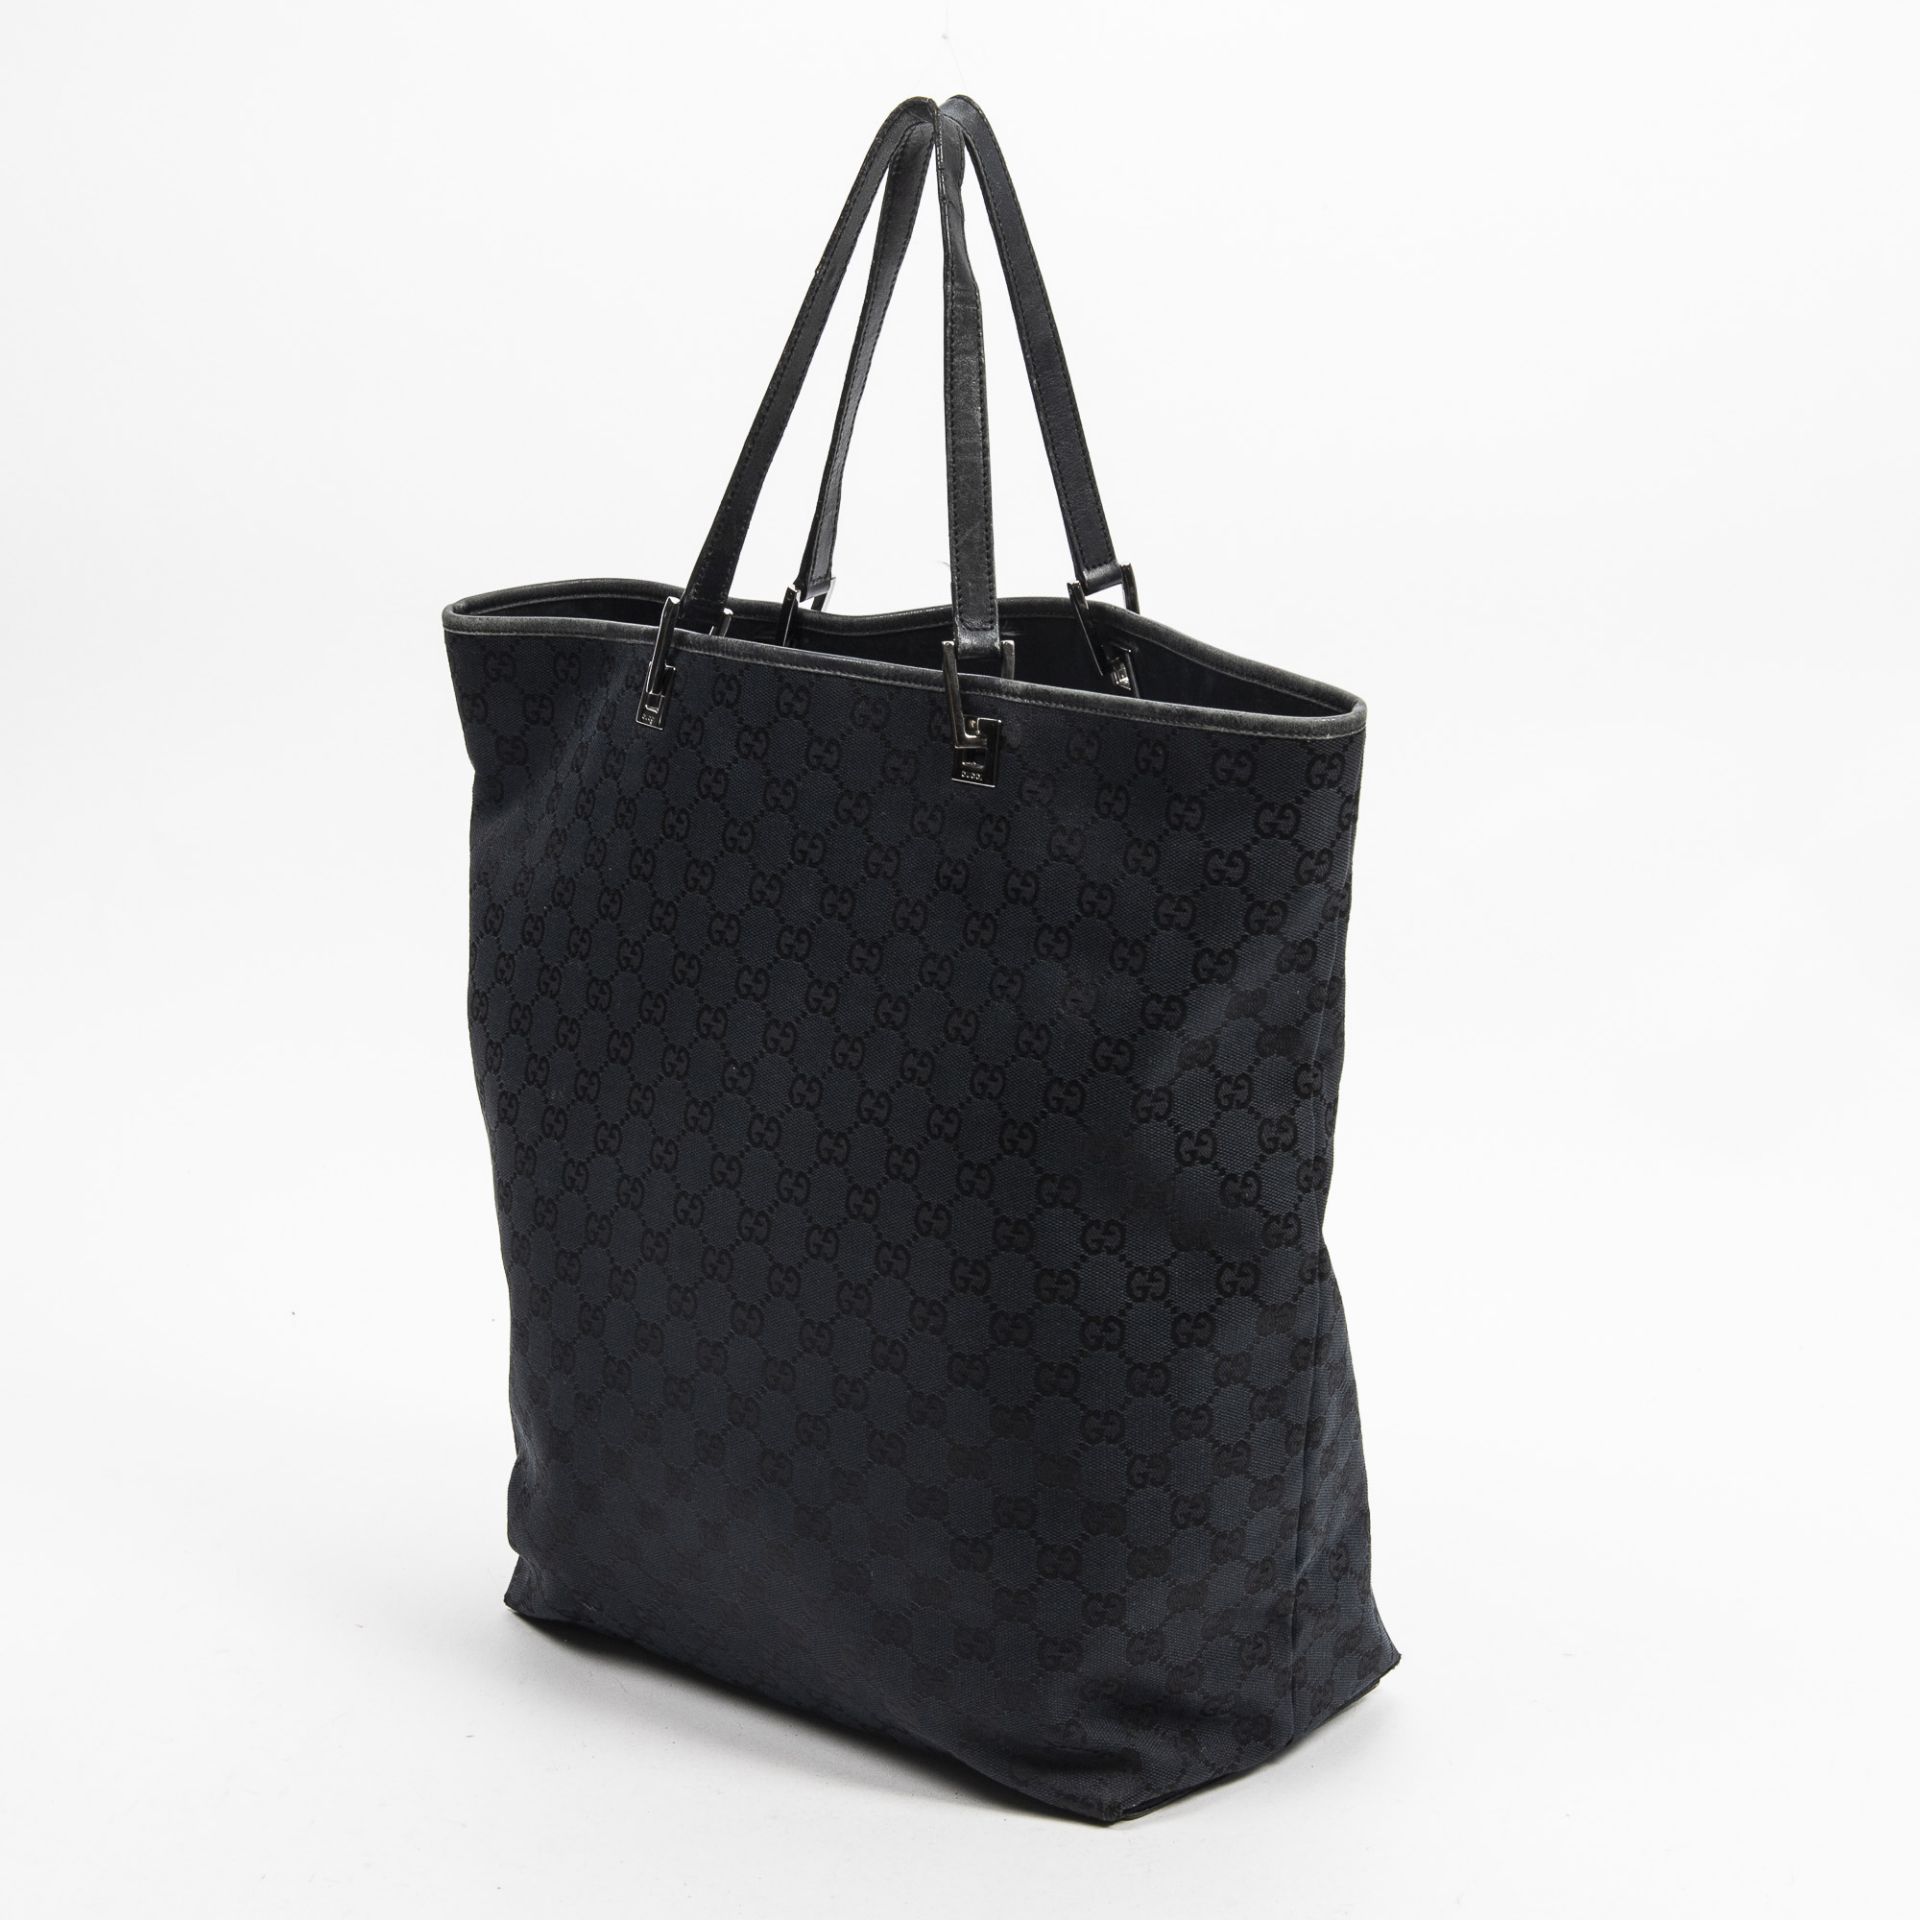 RRP £880.00 Lot To Contain 1 Gucci Canvas Large Shopping Tote Shoulder Bag In Black - 29*39*15cm - - Image 2 of 4